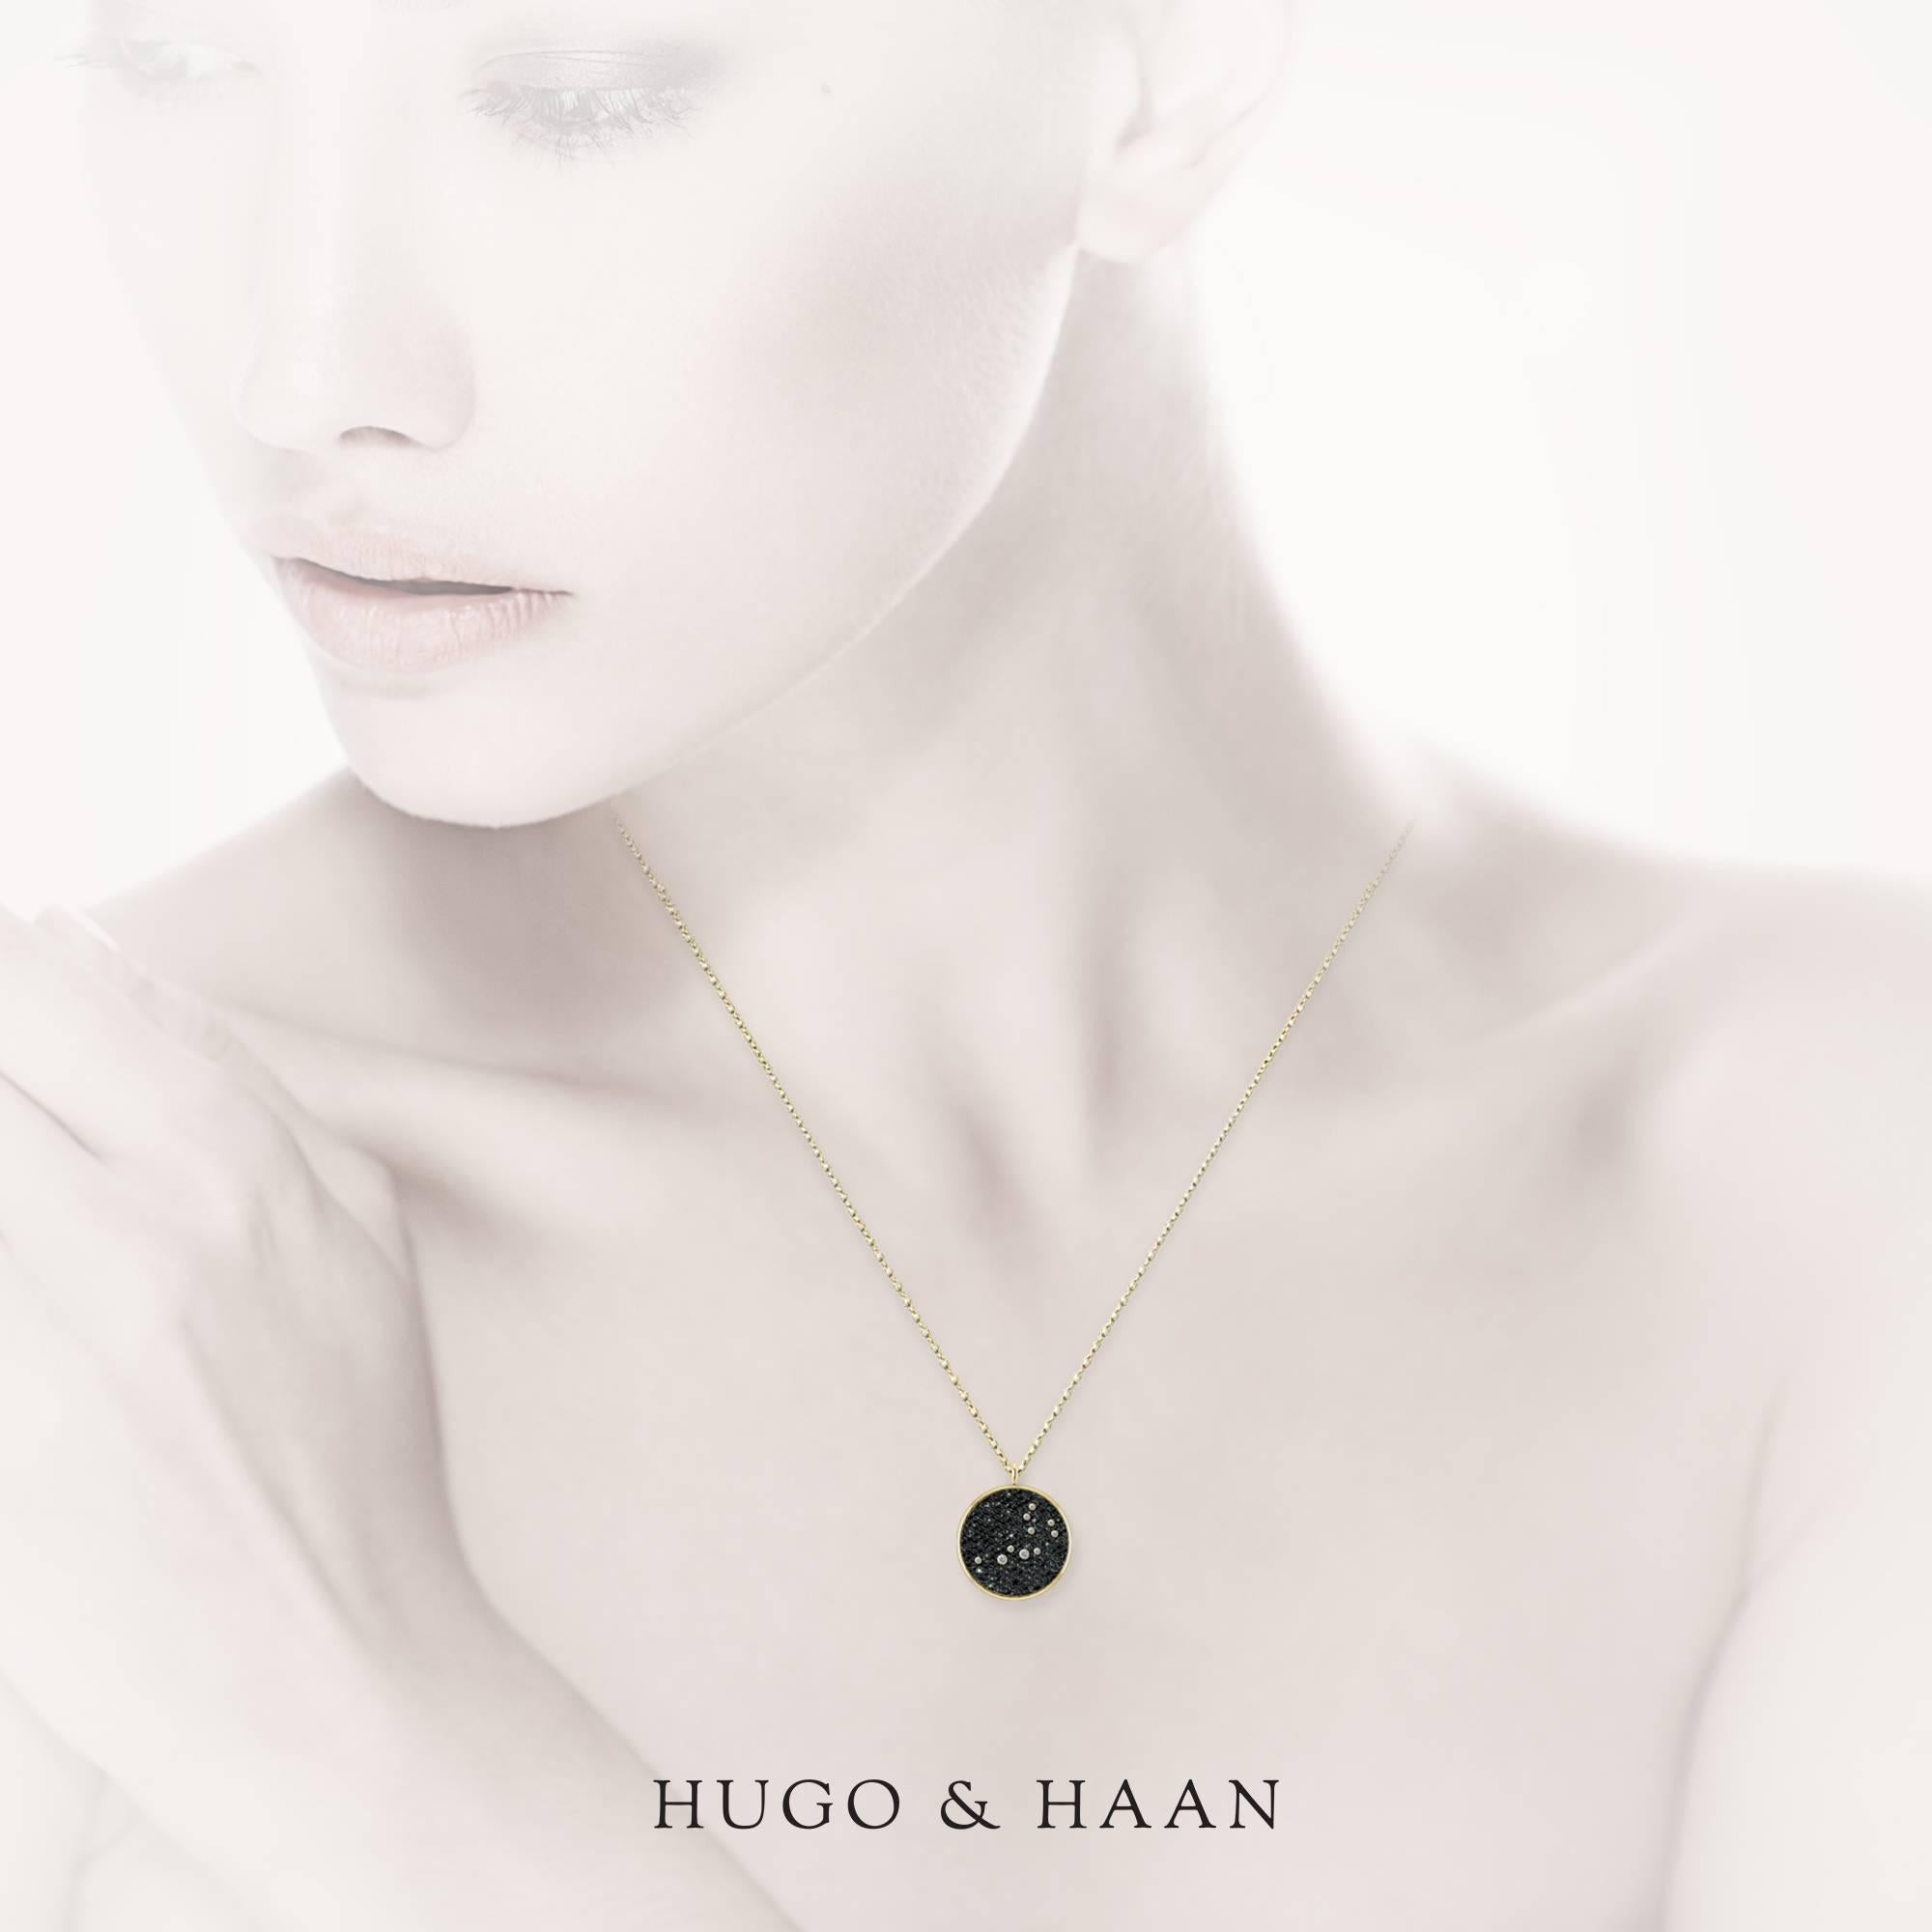 Hugo & Haan Gold Diamond Aquarius Zodiac Constellation Star Pendant Necklace In New Condition For Sale In London, GB